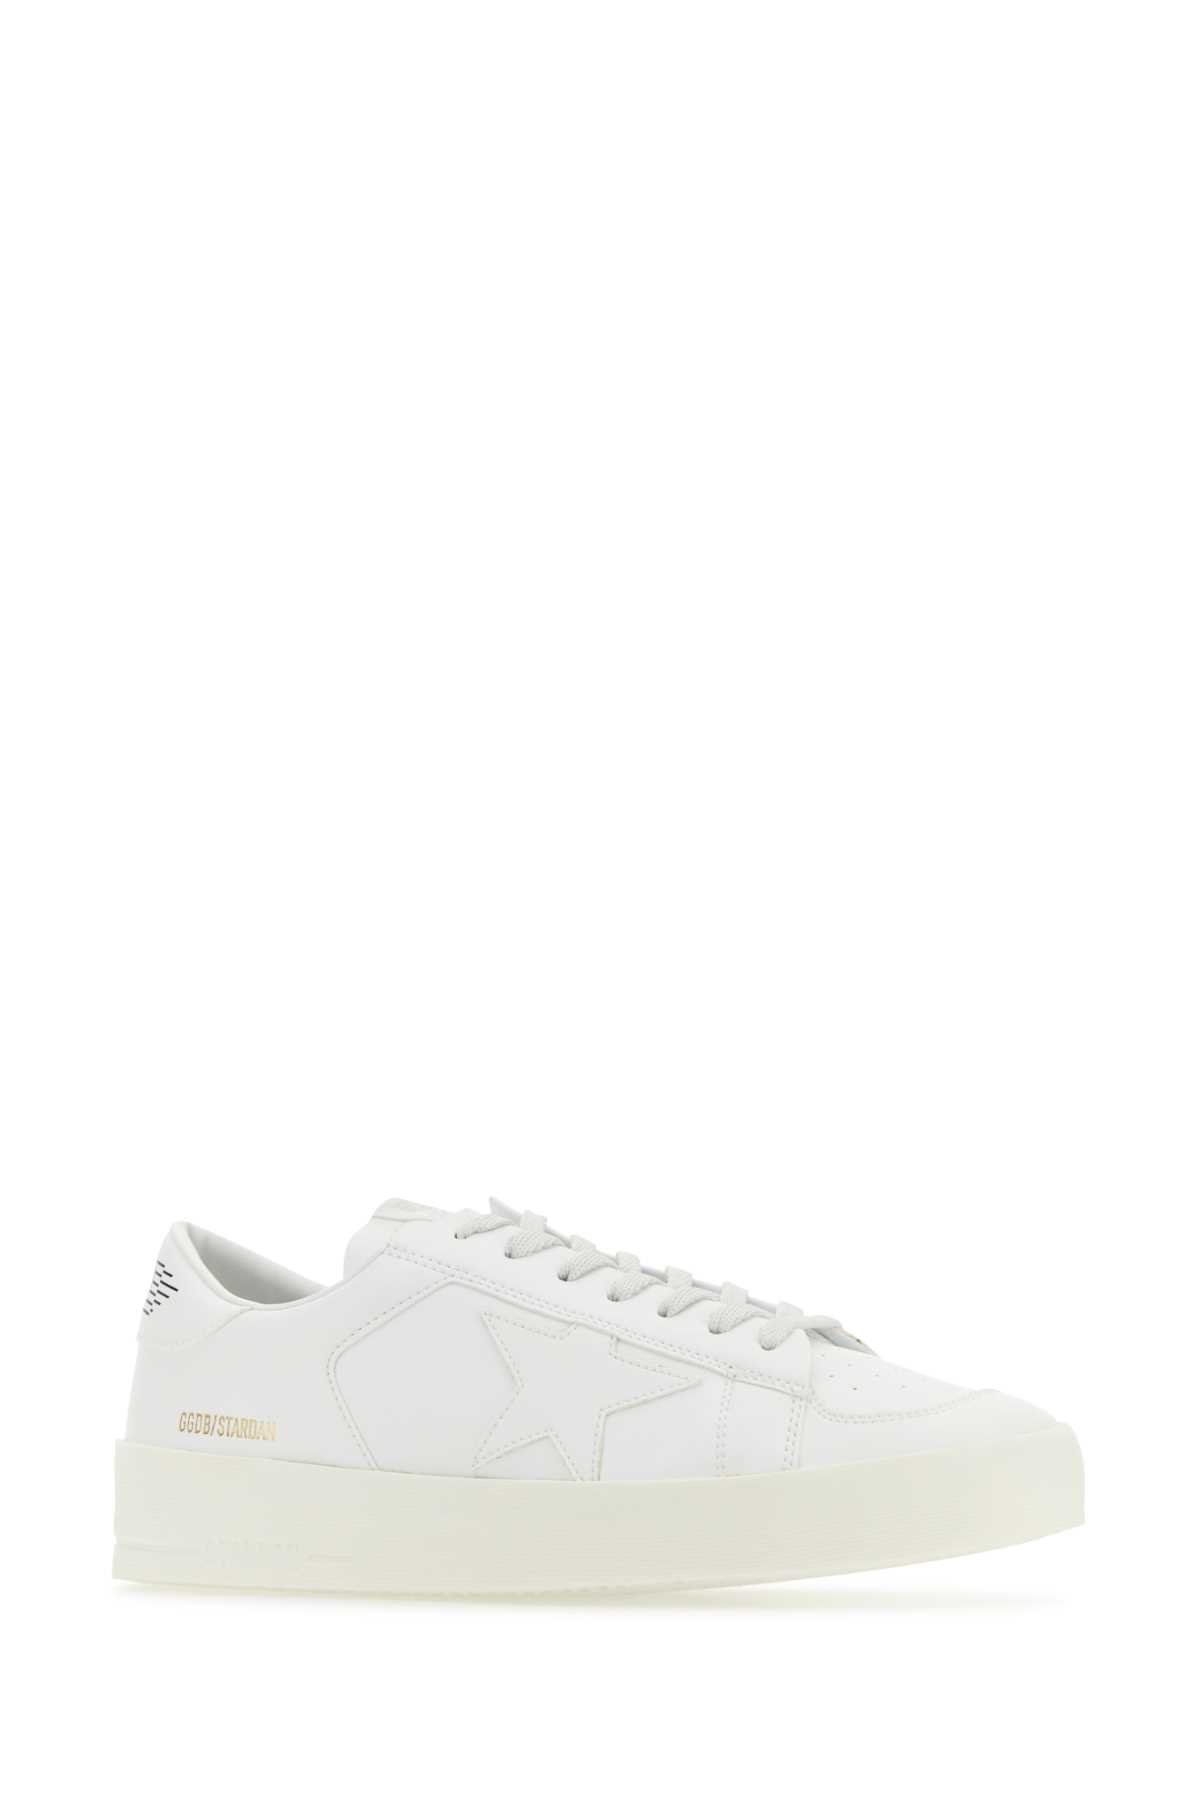 GOLDEN GOOSE WHITE SYNTHETIC LEATHER STARDAN trainers